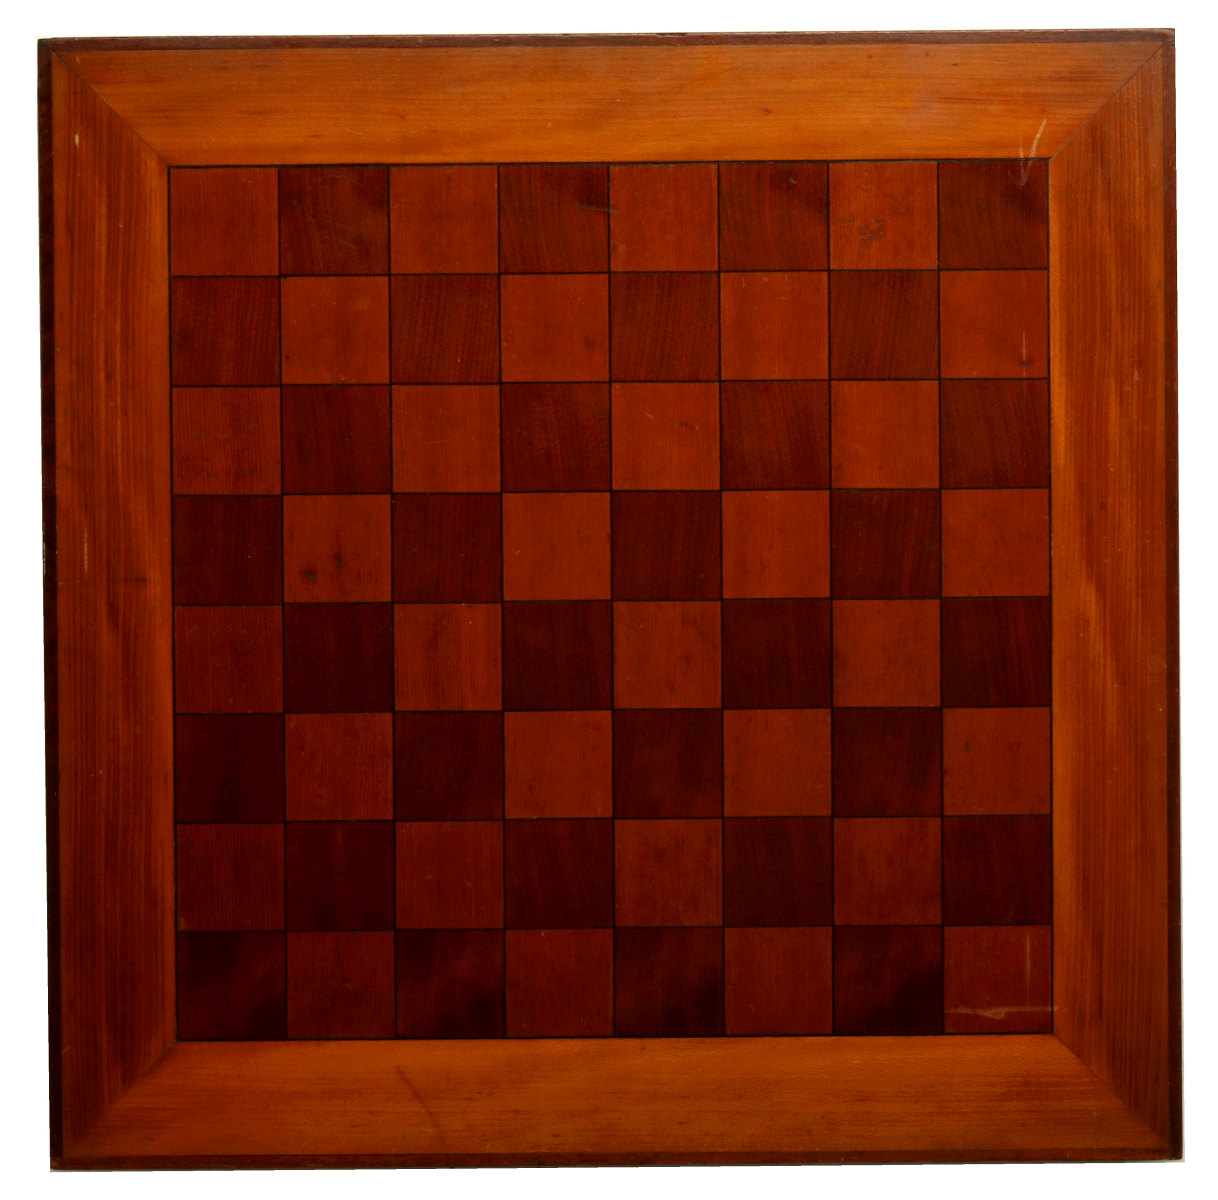 A CHERRY GAME TABLE WITH MAHOGANY INLAY